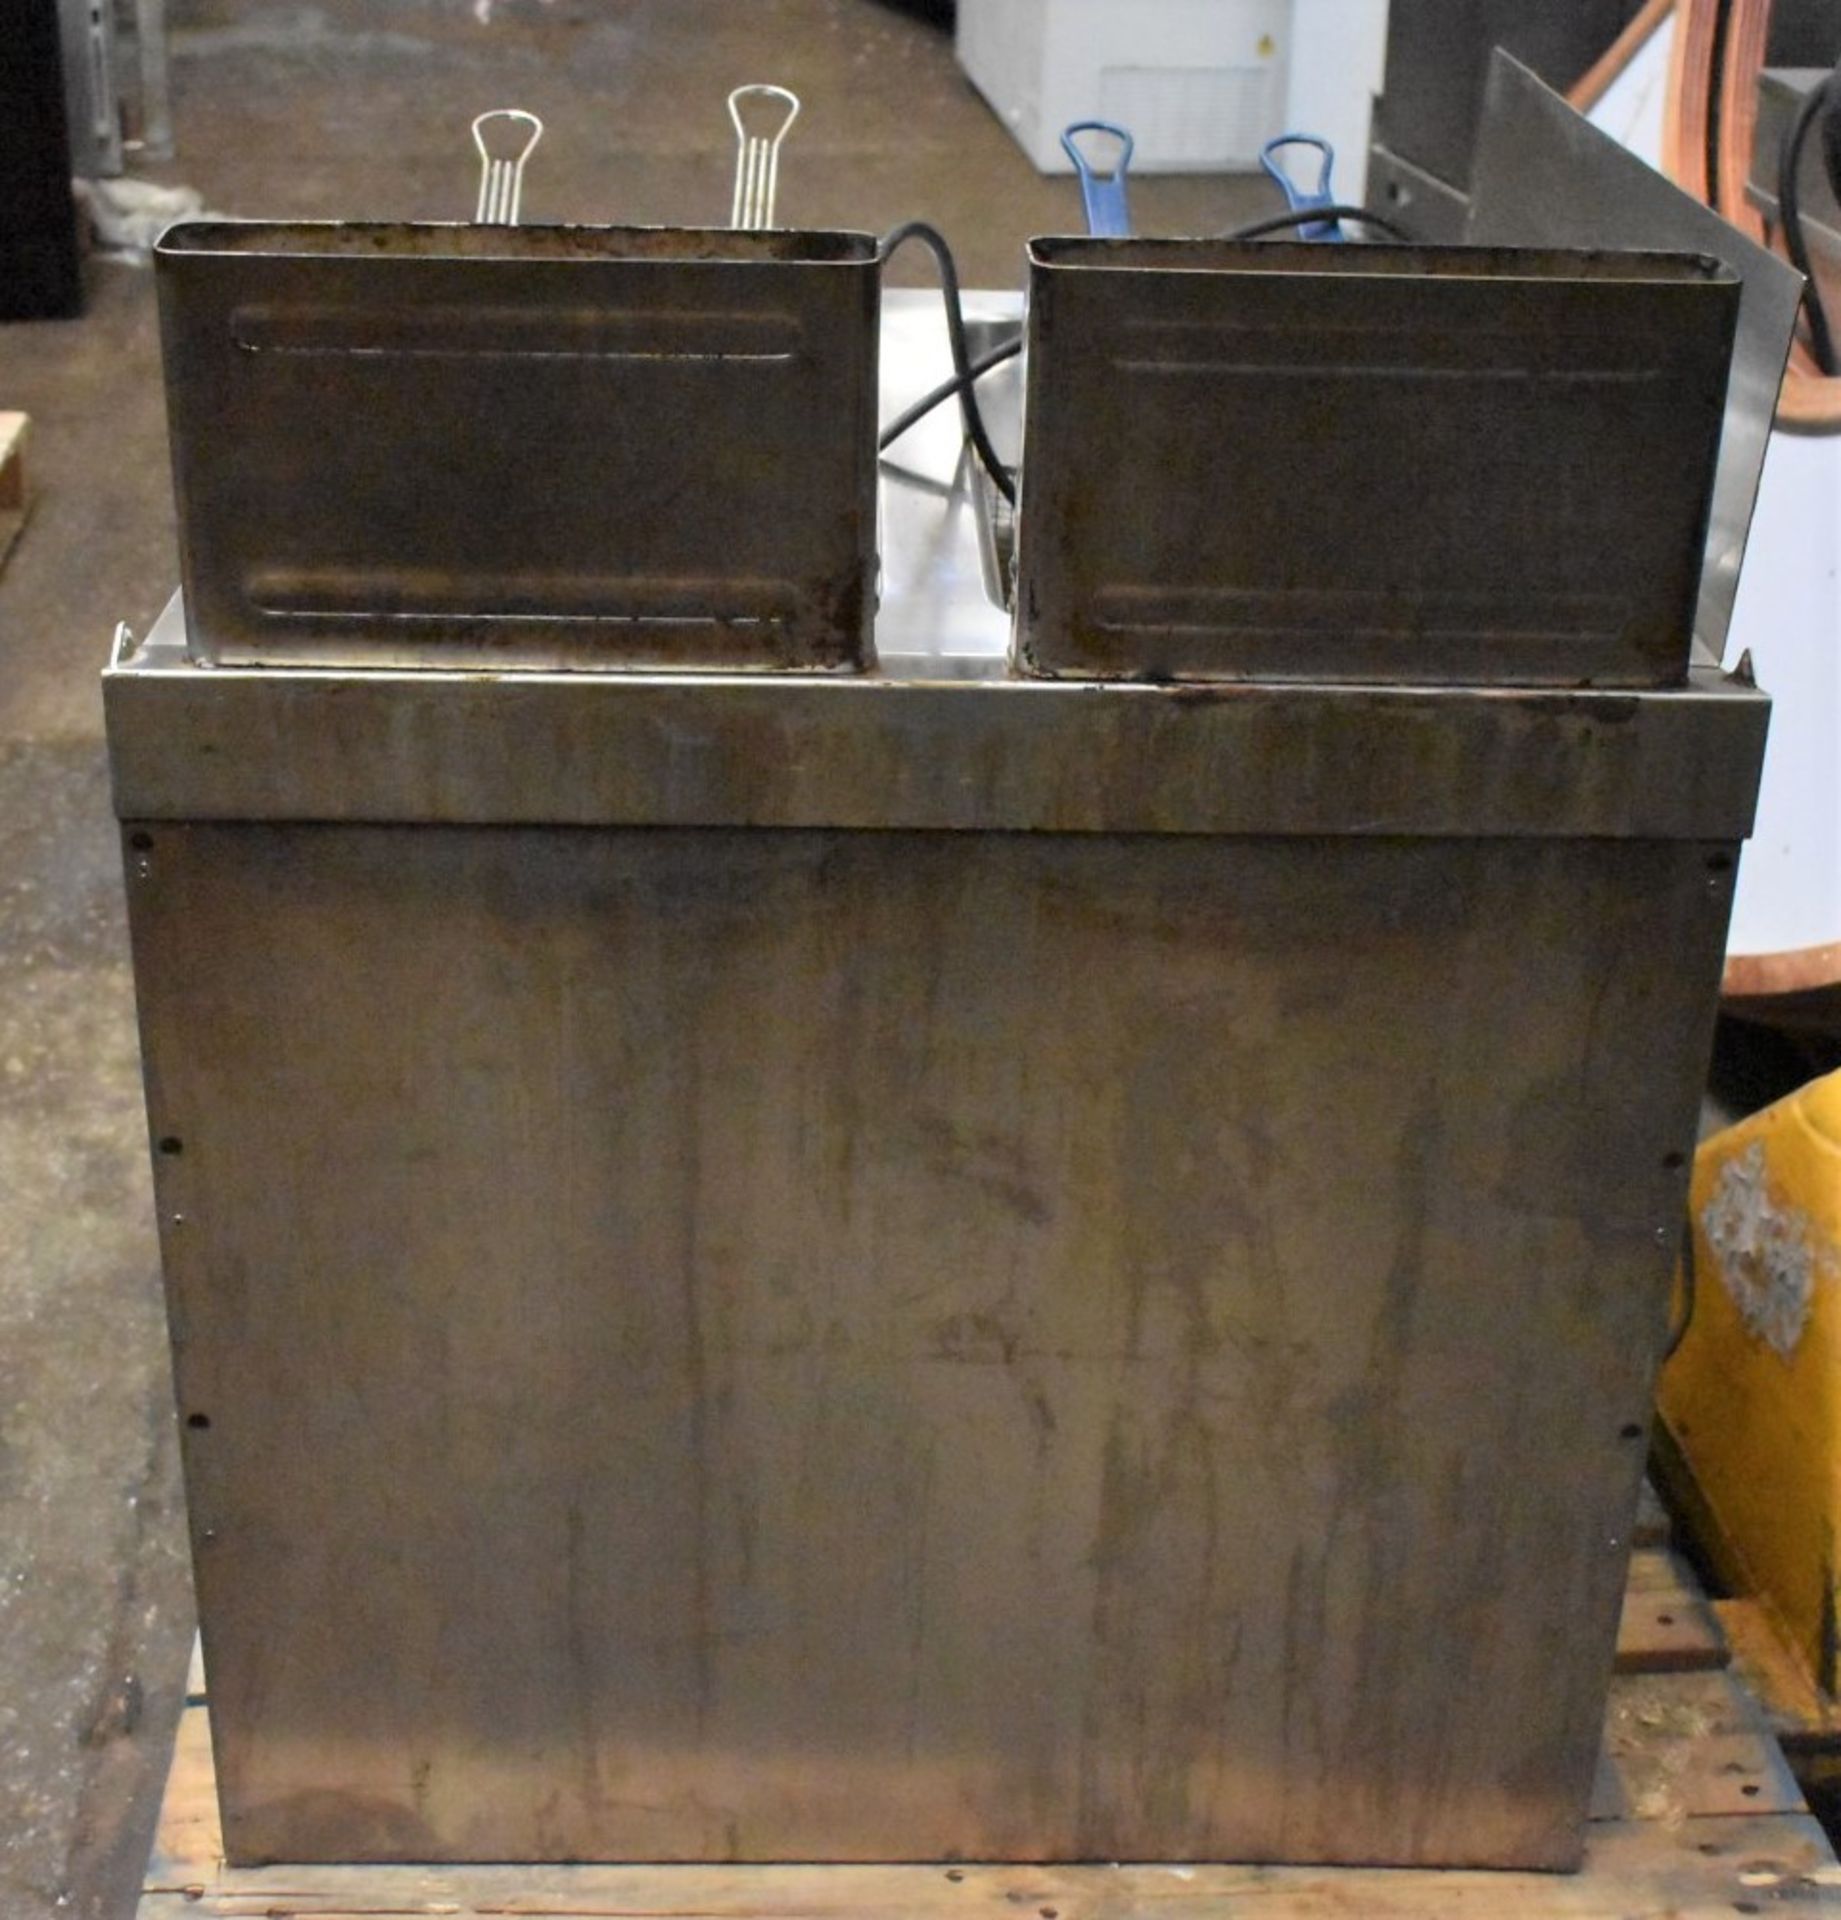 1 x Angelo Po Twin Tank Commercial Fryer - Includes Baskets - Removed From a Commercial Kitchen - Image 2 of 17